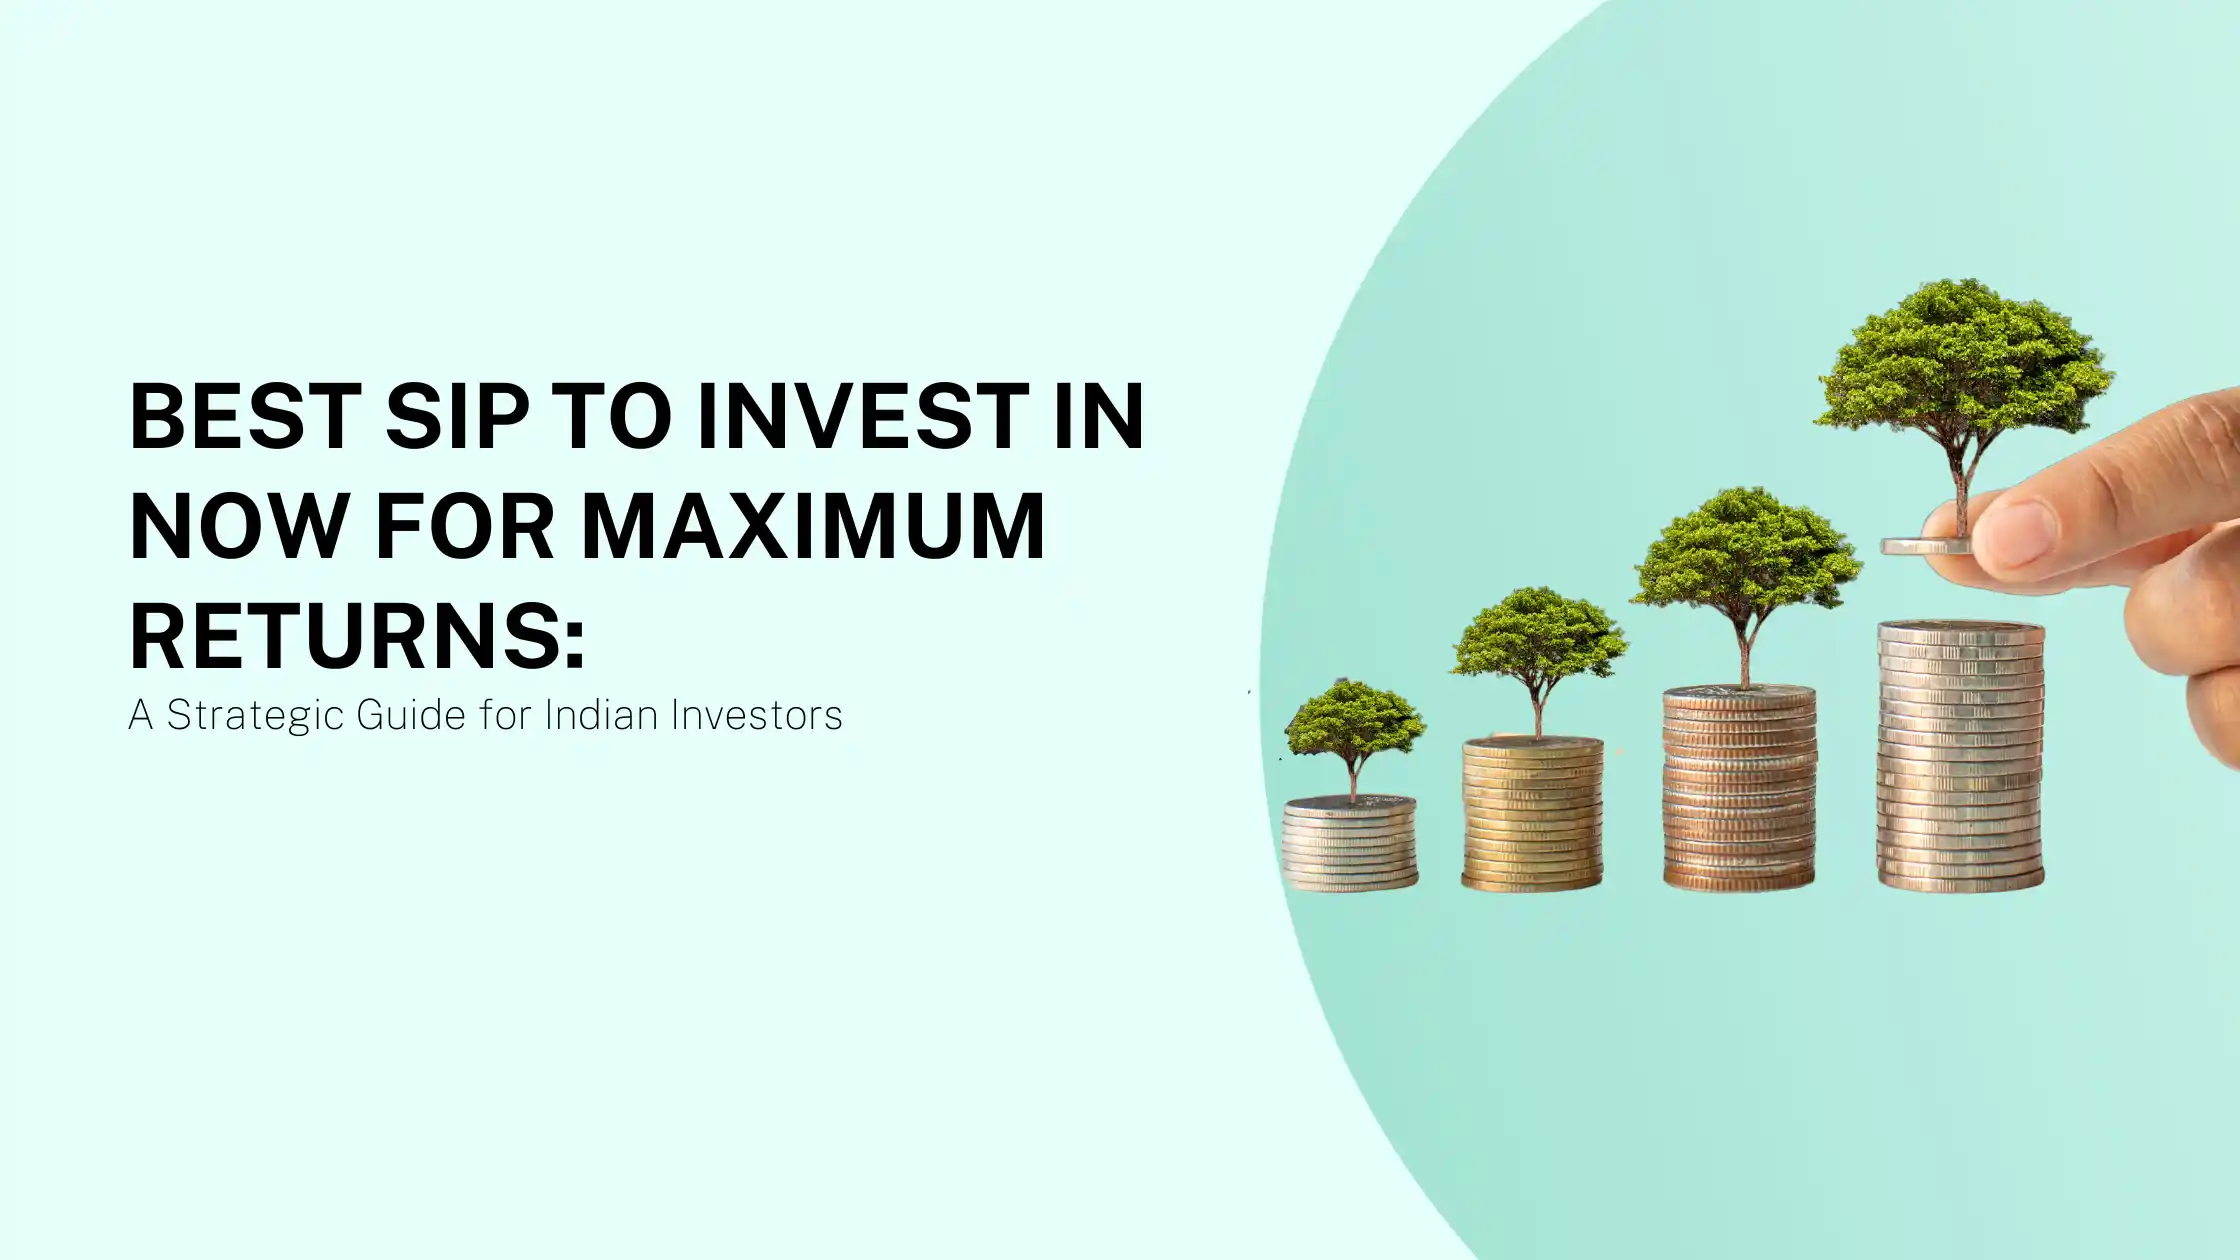 Best SIP to Invest In Now for Maximum Returns: A Strategic Guide for Indian Investors